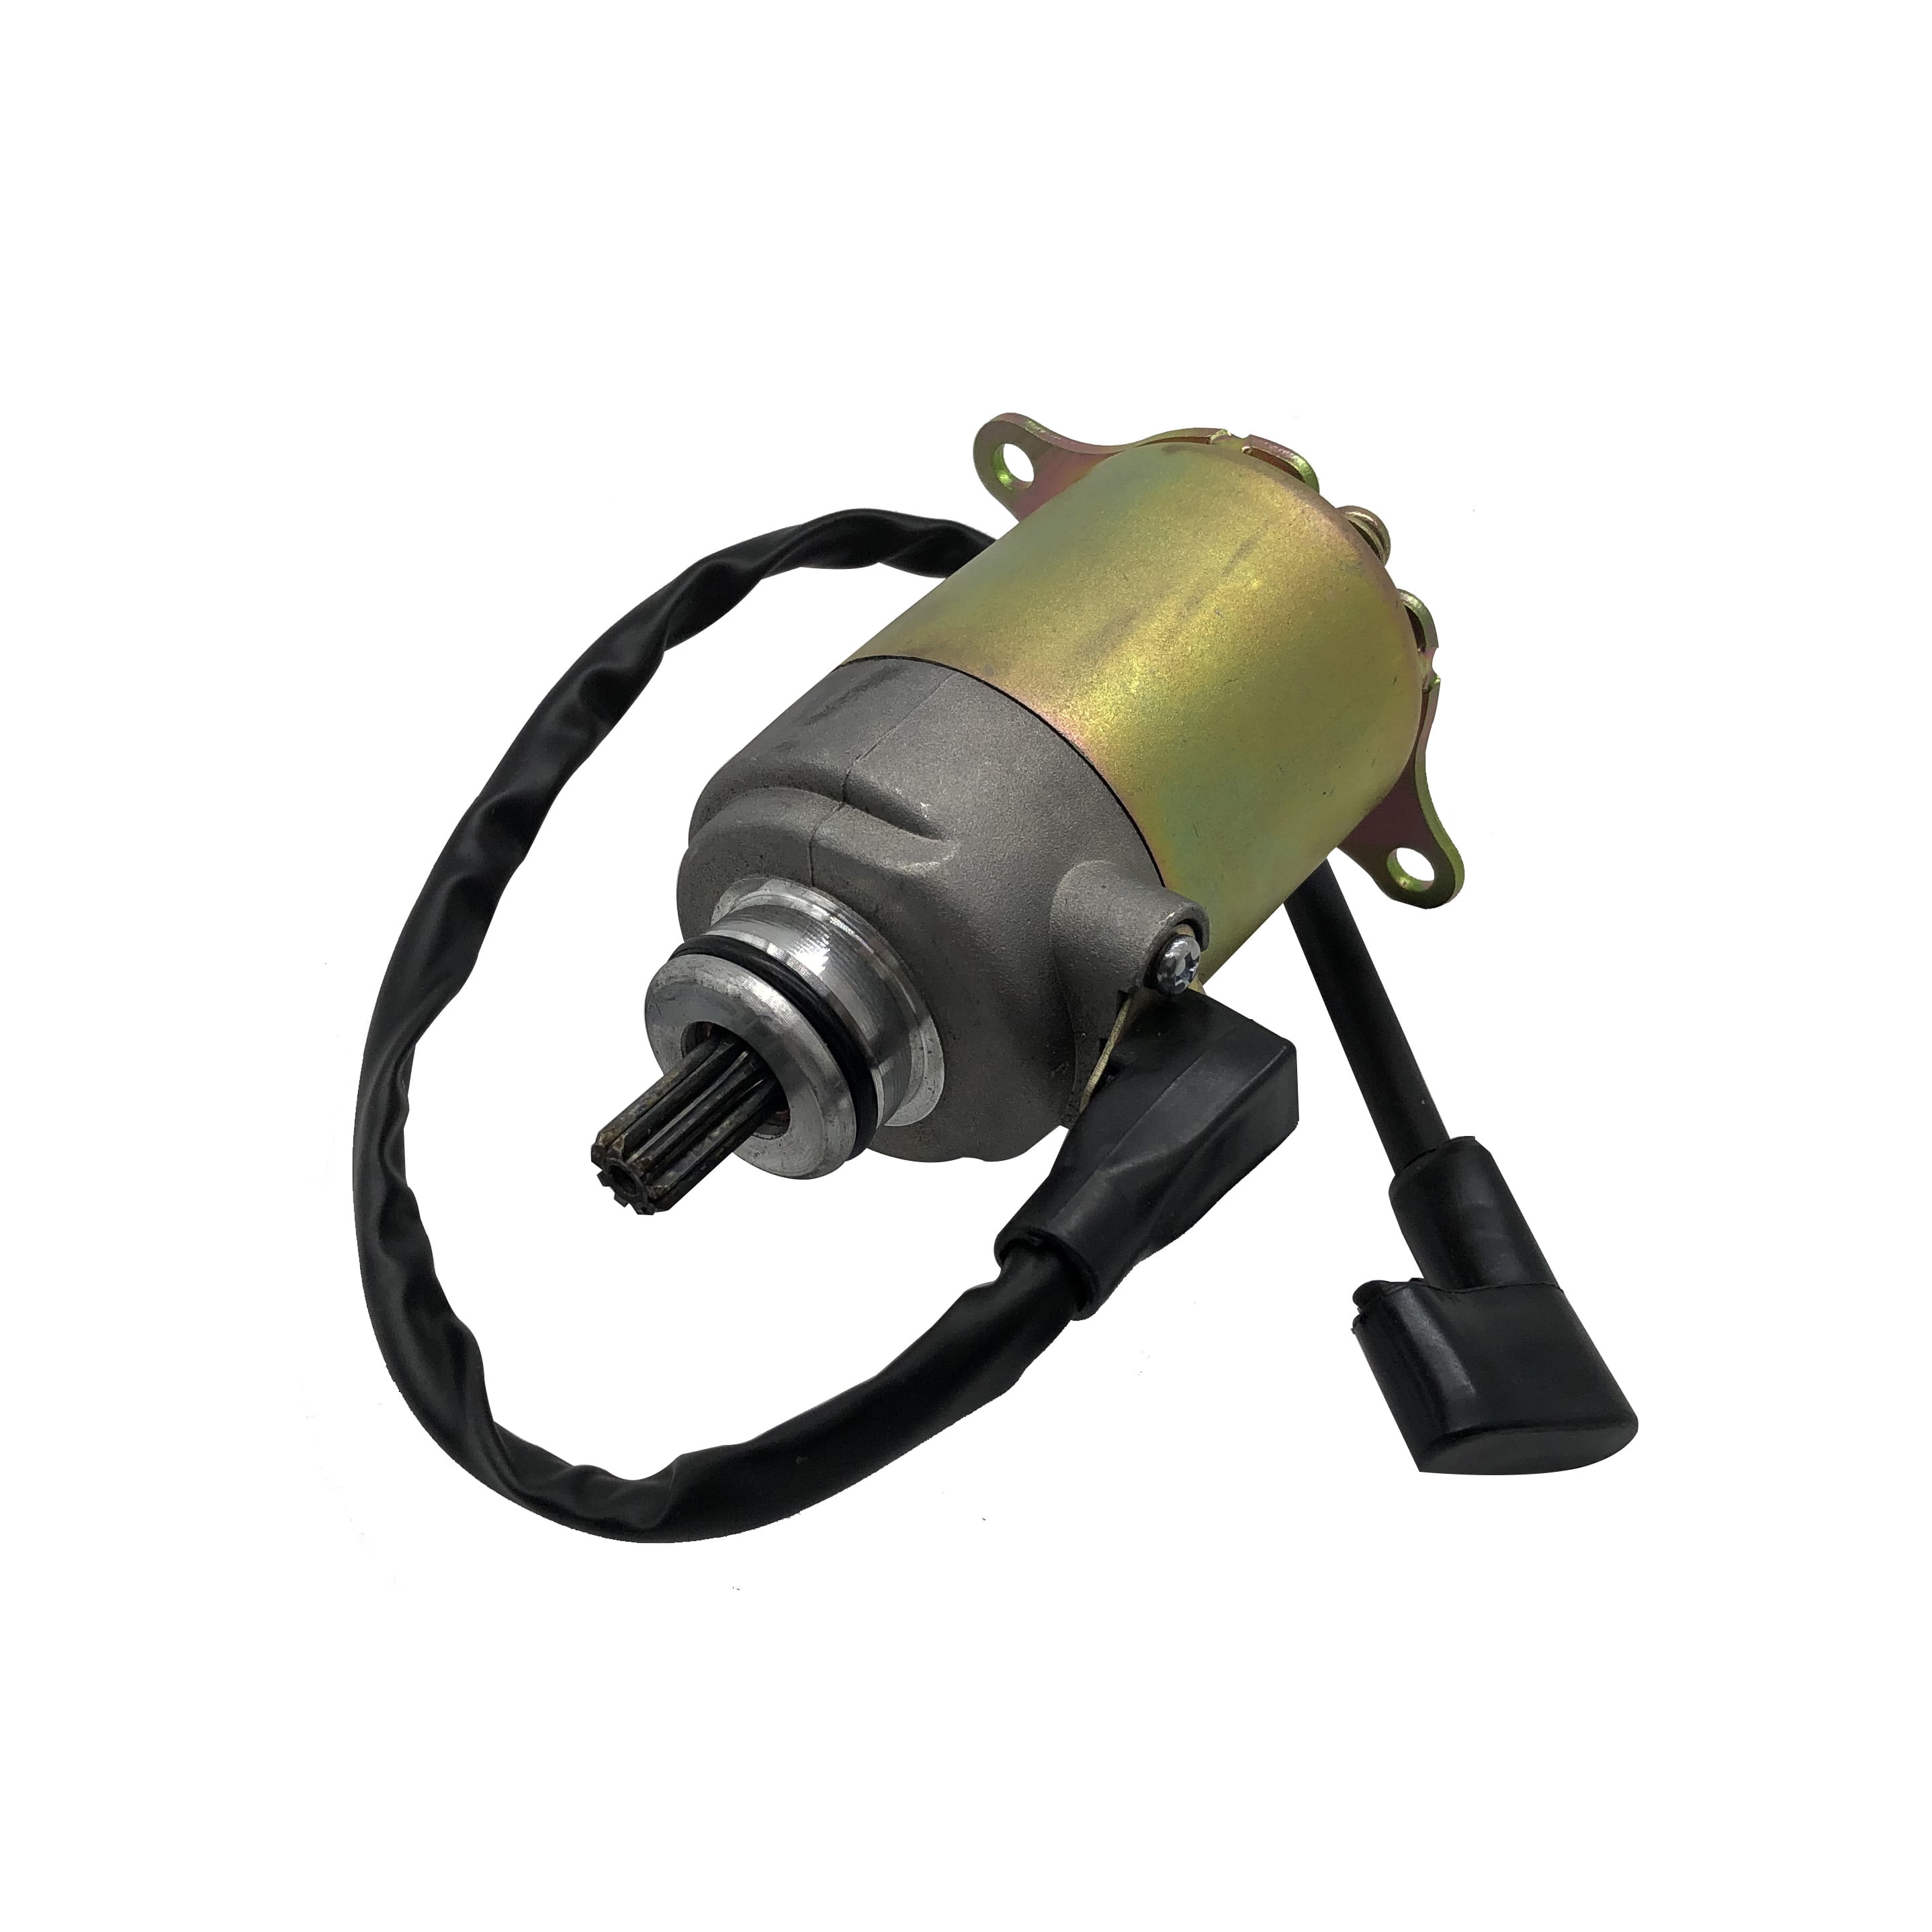 150cc STARTER MOTOR FOR CHINESE SCOOTERS AND KARTS WITH 150cc GY6 MOTORS ATVS 